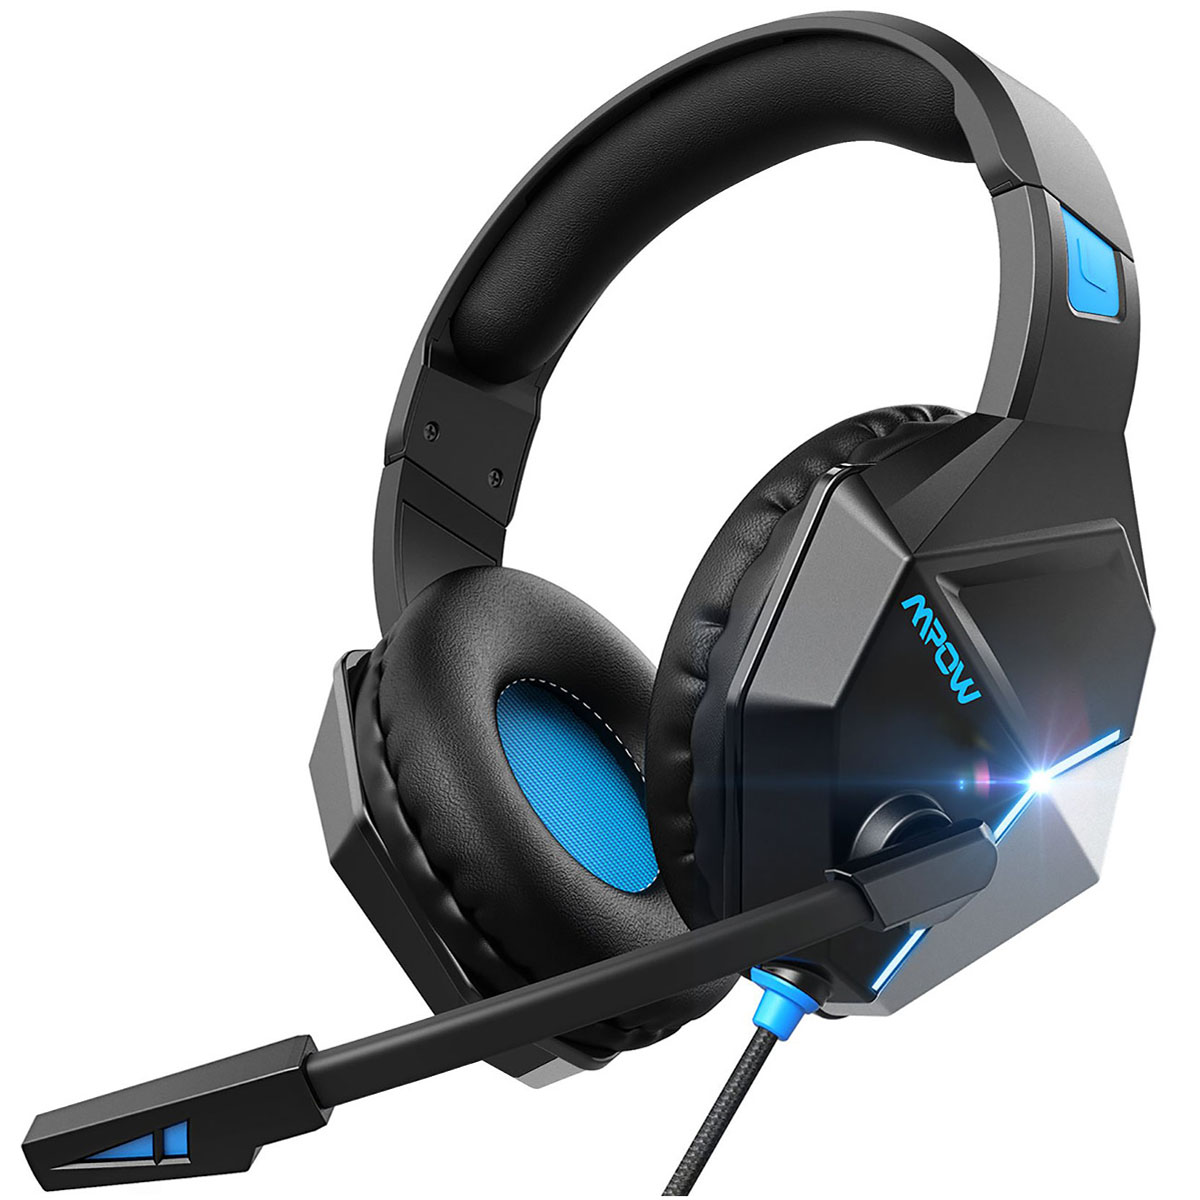 Buy Best Mpow EG10 Gaming Headsets in Pakistan